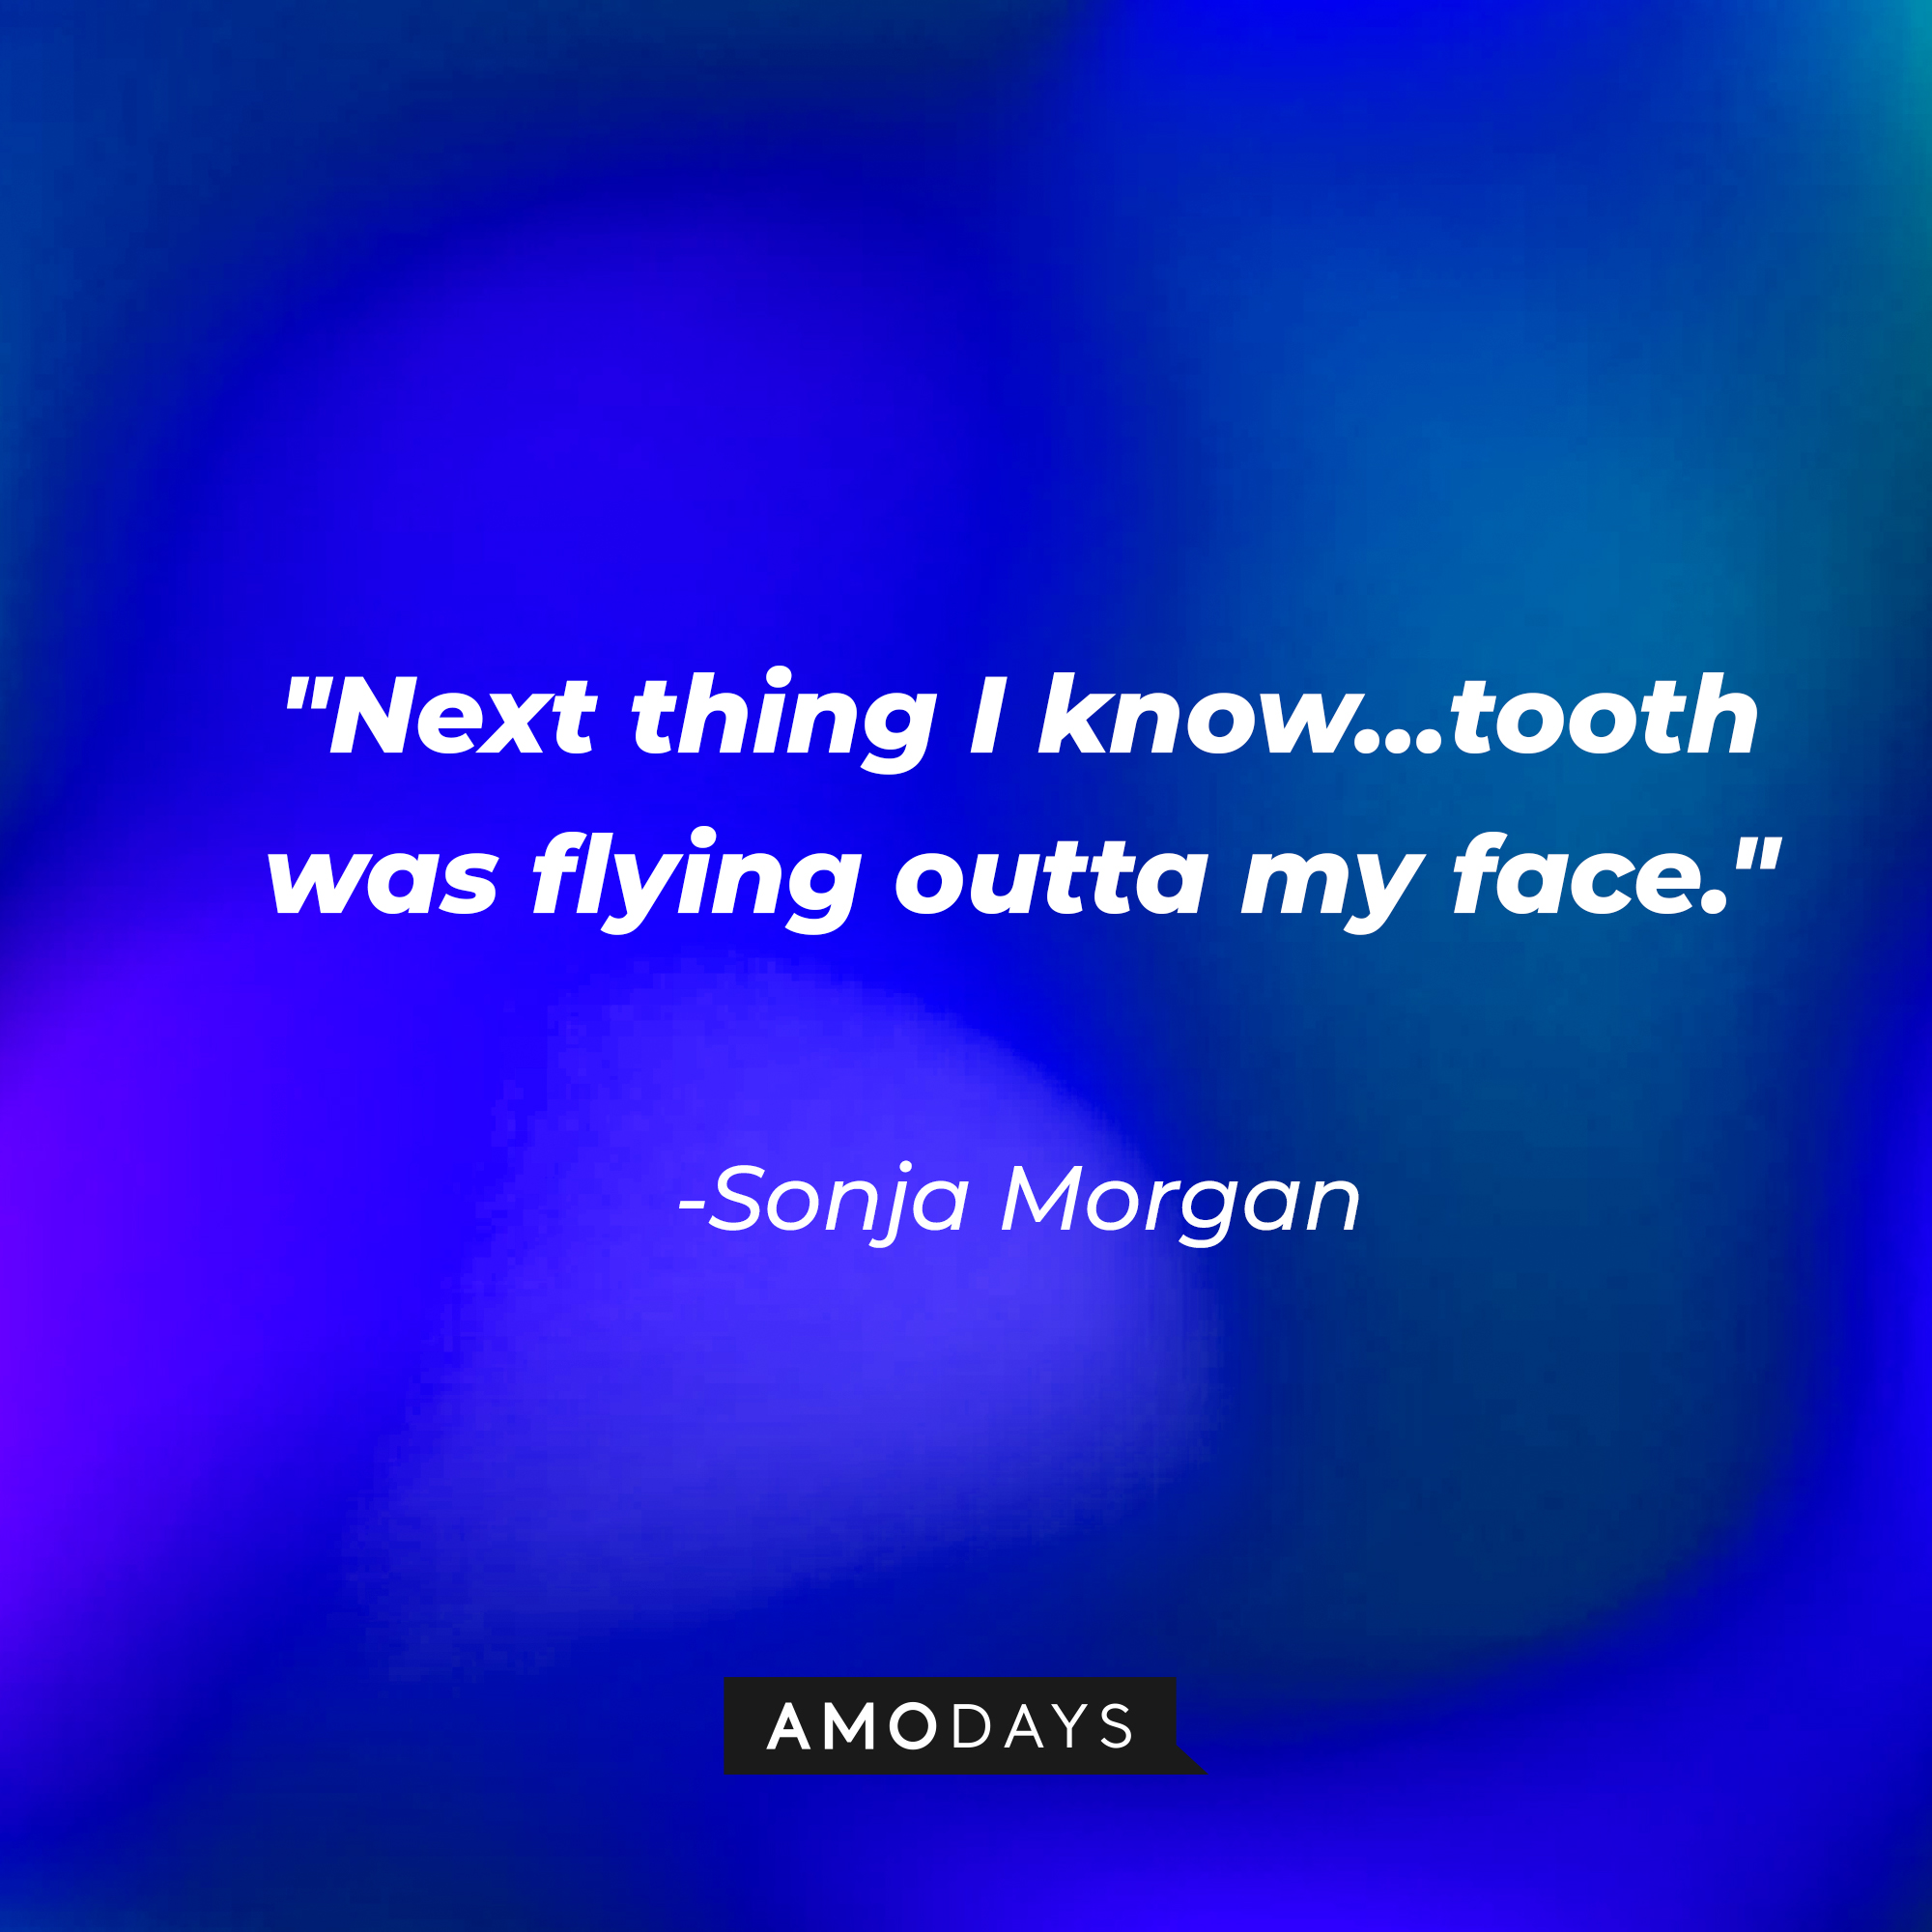 Sonja Morgan's quote: "Next thing I know...tooth was flying outta my face." Sonja Morgan's quote: "I don't stir the pot. I stir the drink." | Source: Amodays